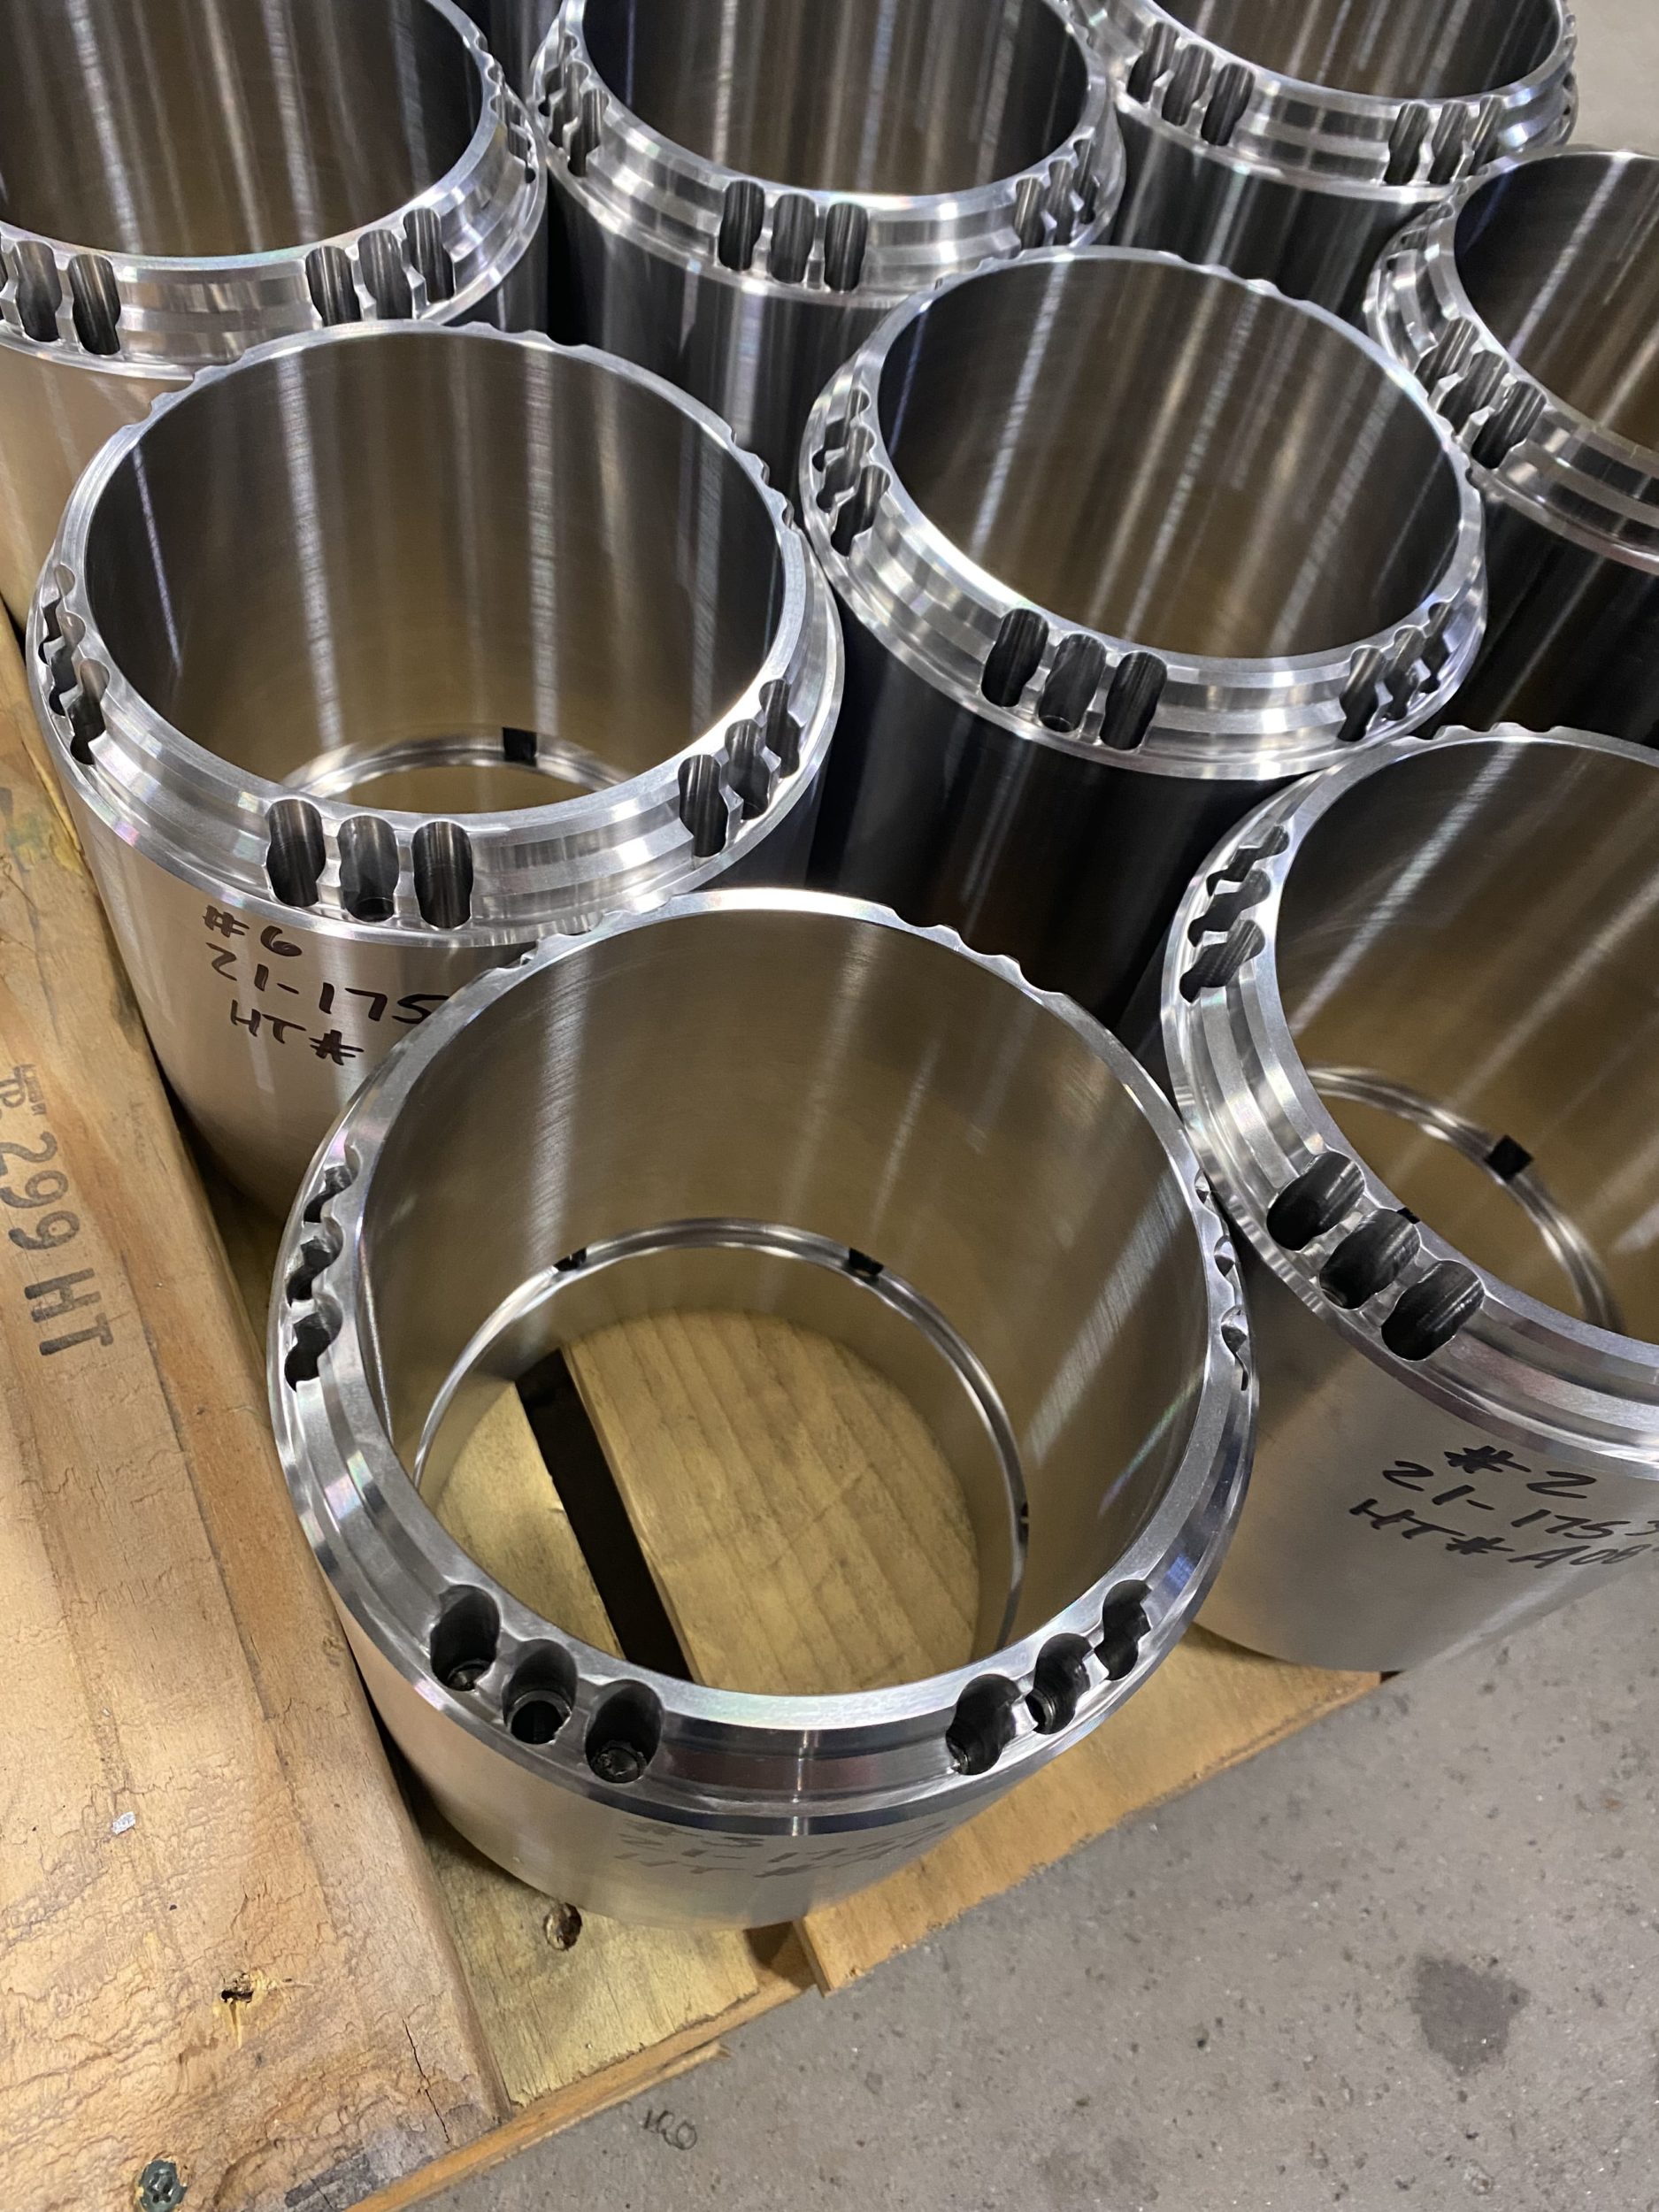 Inconel Housings For Oilfield - Ran on 9 axis lathe in 2 OPS